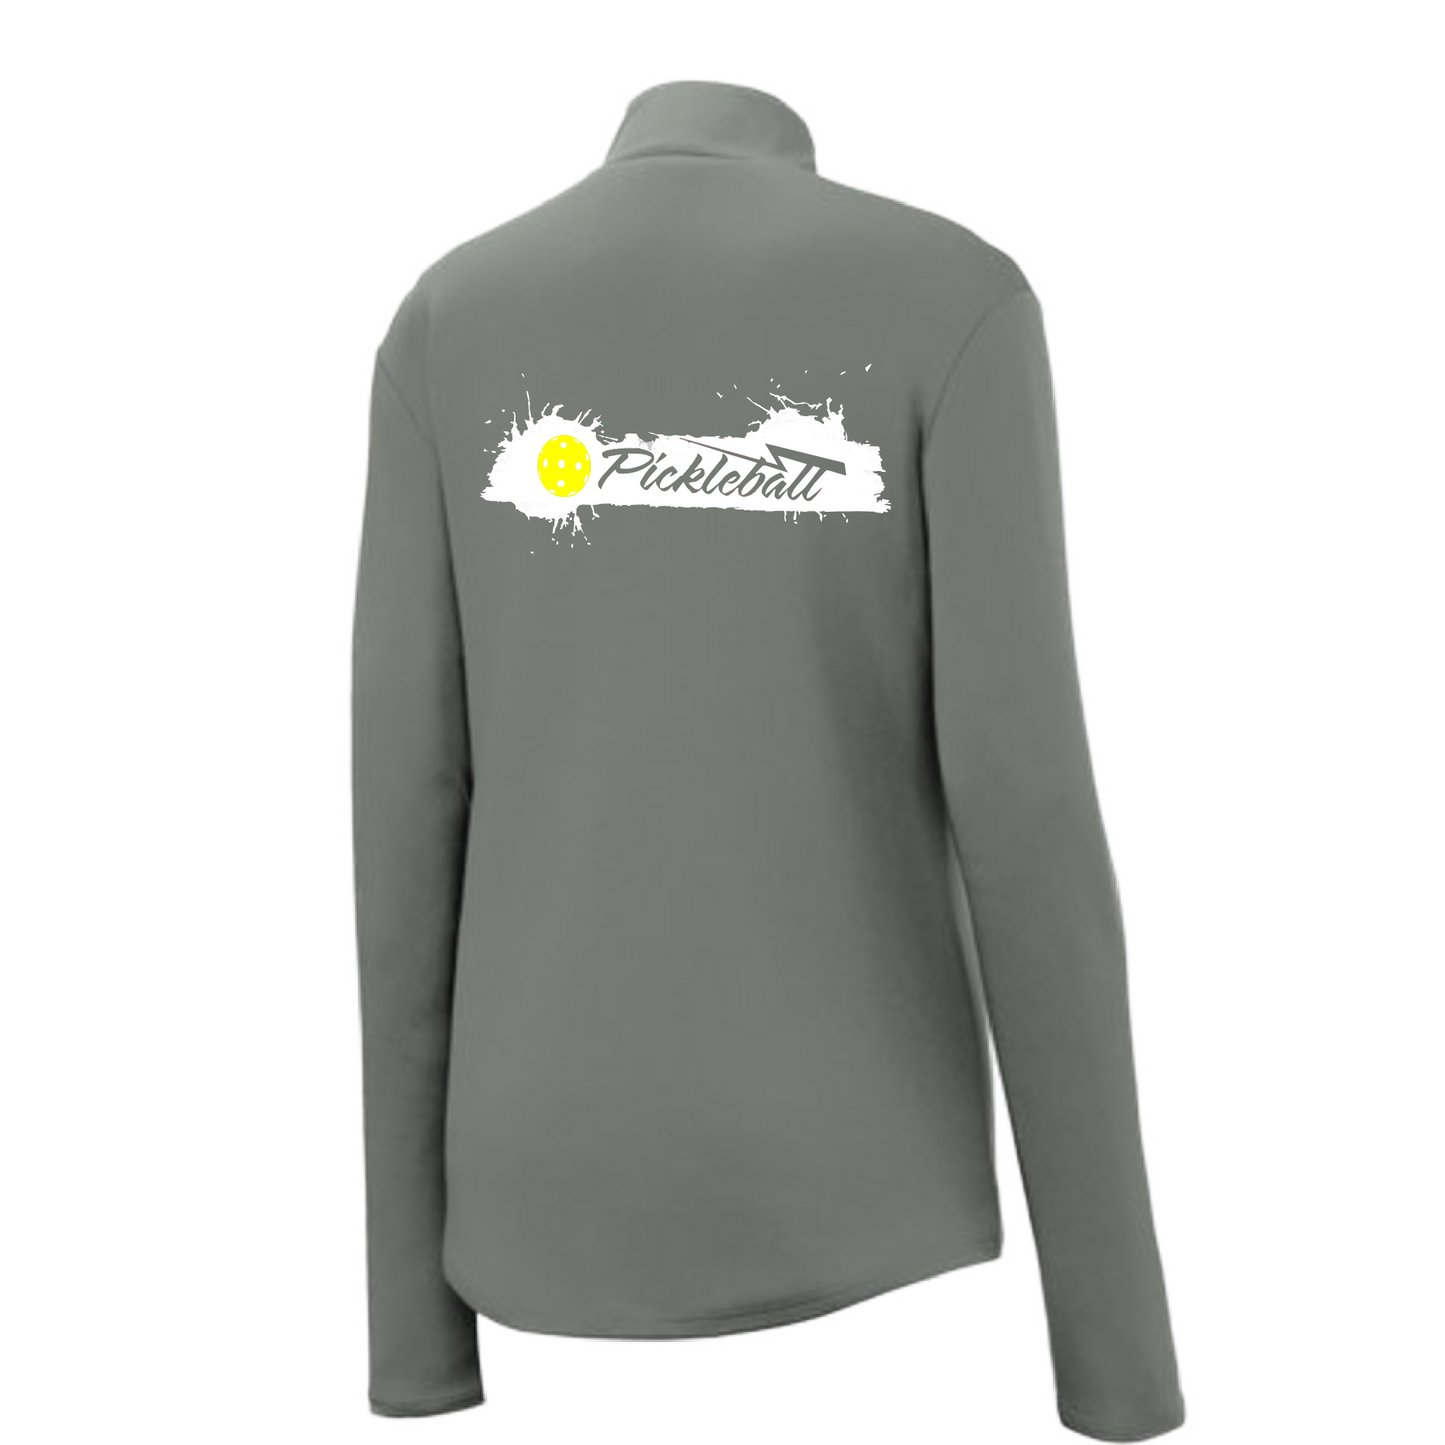 Pickleball Design: Extreme  Women's 1/4-Zip Pullover:  Princess seams and drop tail hem.  Turn up the volume in this Women's shirt with its perfect mix of softness and attitude. Material is ultra-comfortable with moisture wicking properties and tri-blend softness. PosiCharge technology locks in color. Highly breathable and lightweight. Versatile enough for wearing year-round.